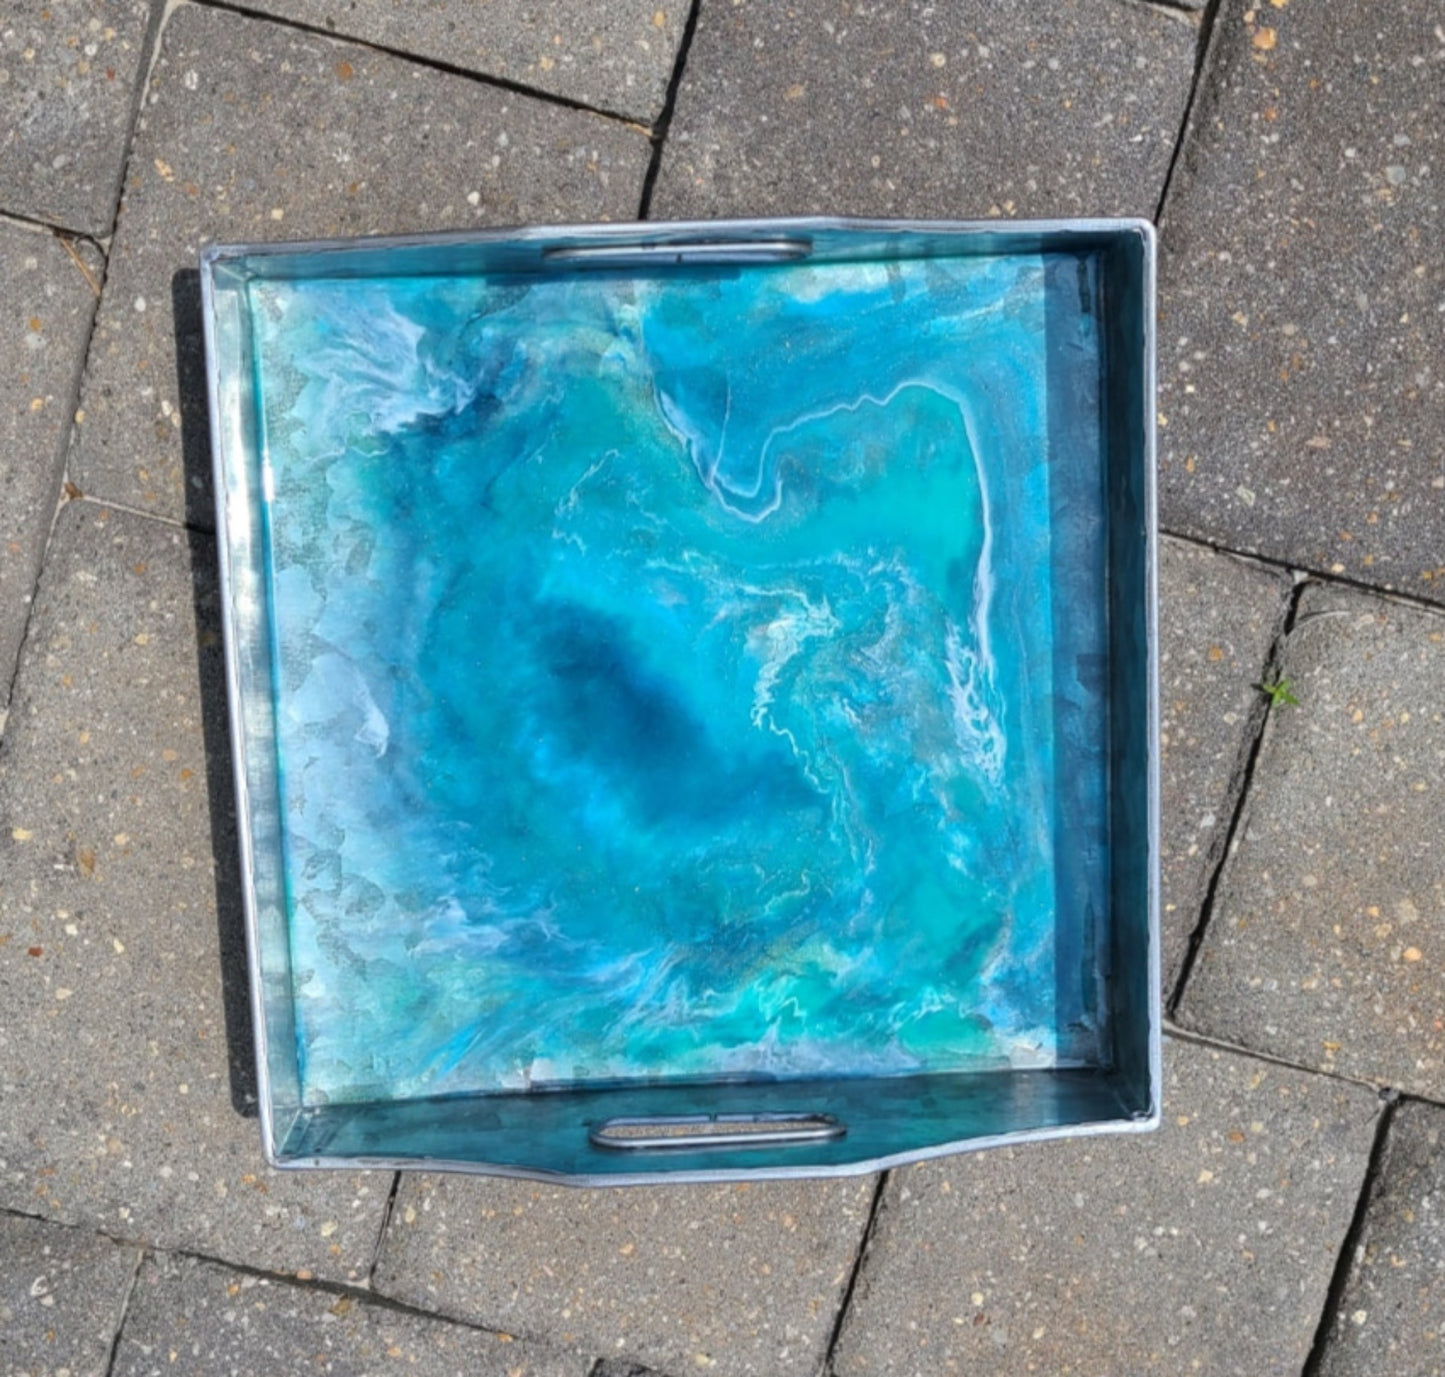 This metal tray has a resin design that looks like a deep blue vortex.  Lightweight metal tray looks like it is made of Aluminum and has cutouts for handles on two sides. Use as serveware or as a trinket dish. Would be perfect for holding remotes on the coffee table.  Resin is UV resistant and food safe.  Approximate size: 9.5 x 9.5 inches square and 1.75 inches deep on the sides without the handles.  Care: Wipe with a damp cloth or clean resin with an alcohol wipe.